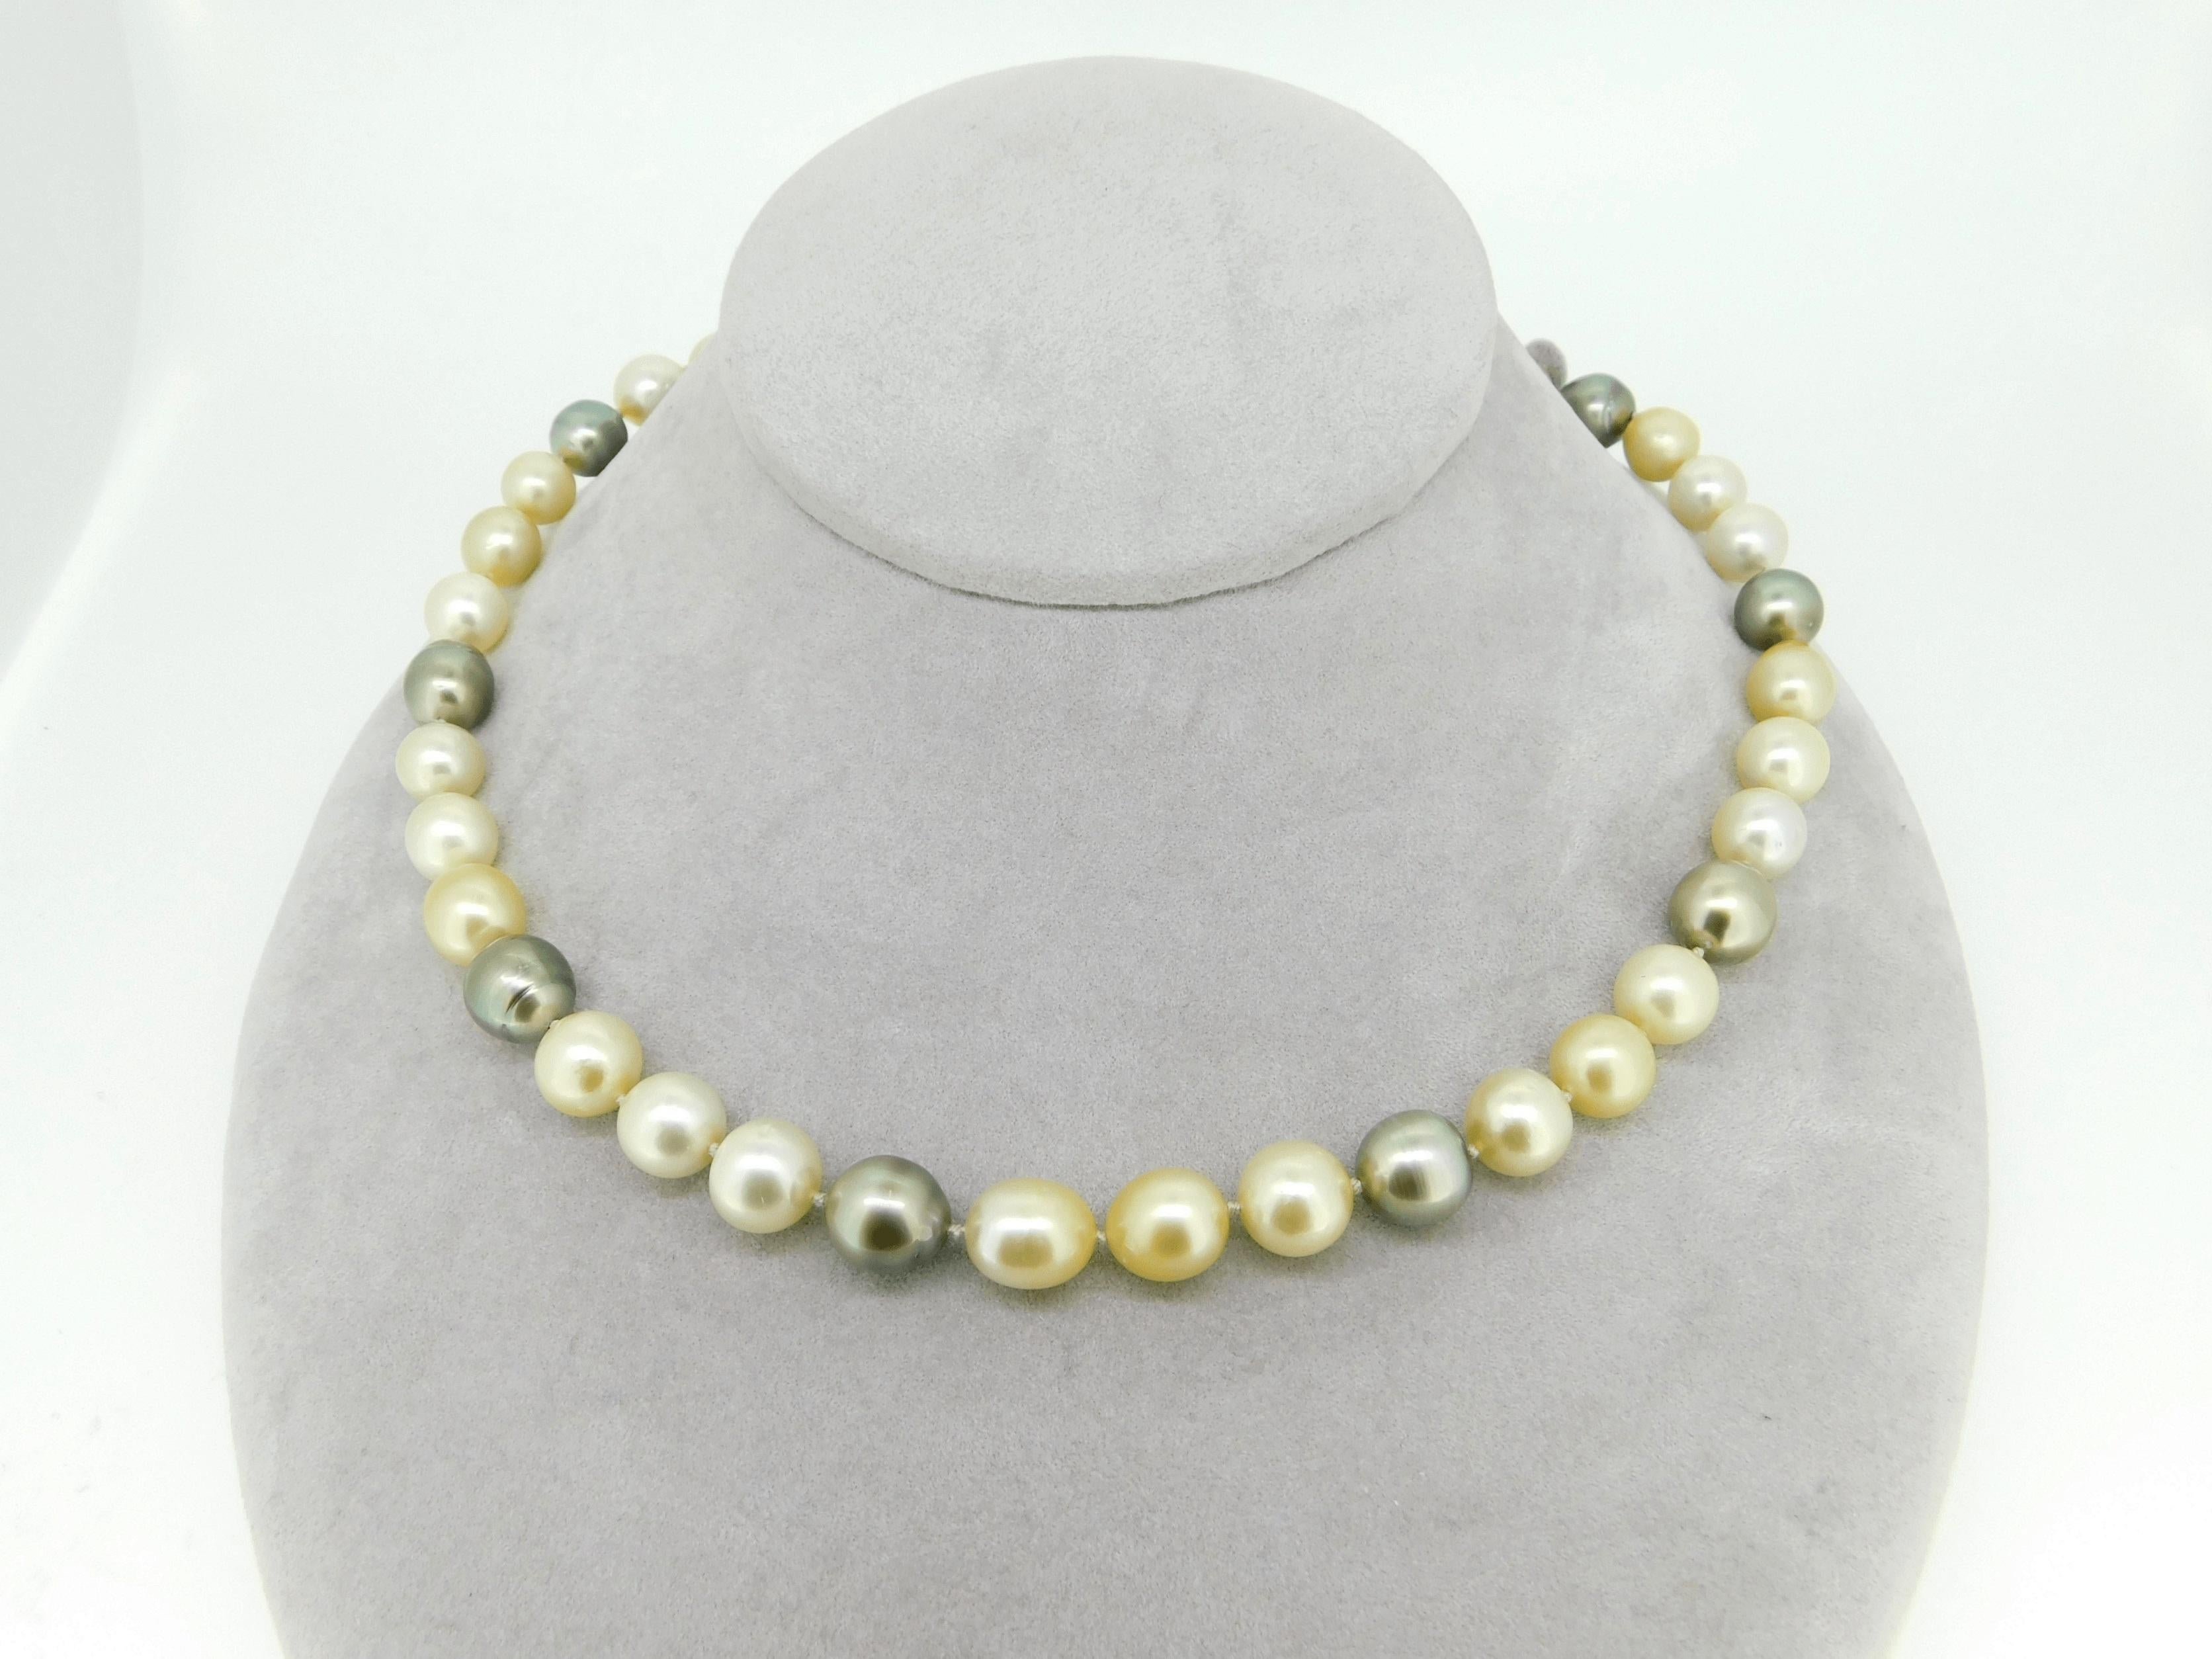 8.5-10mm Tahitian South Sea Multi Color Pearl Necklace (#J4414)

Strands of multi-color Tahitian and South Sea cultured pearls. The pearls are all natural colors and are individually knotted. There are forty-three pearls ranging in size from 8.5mm